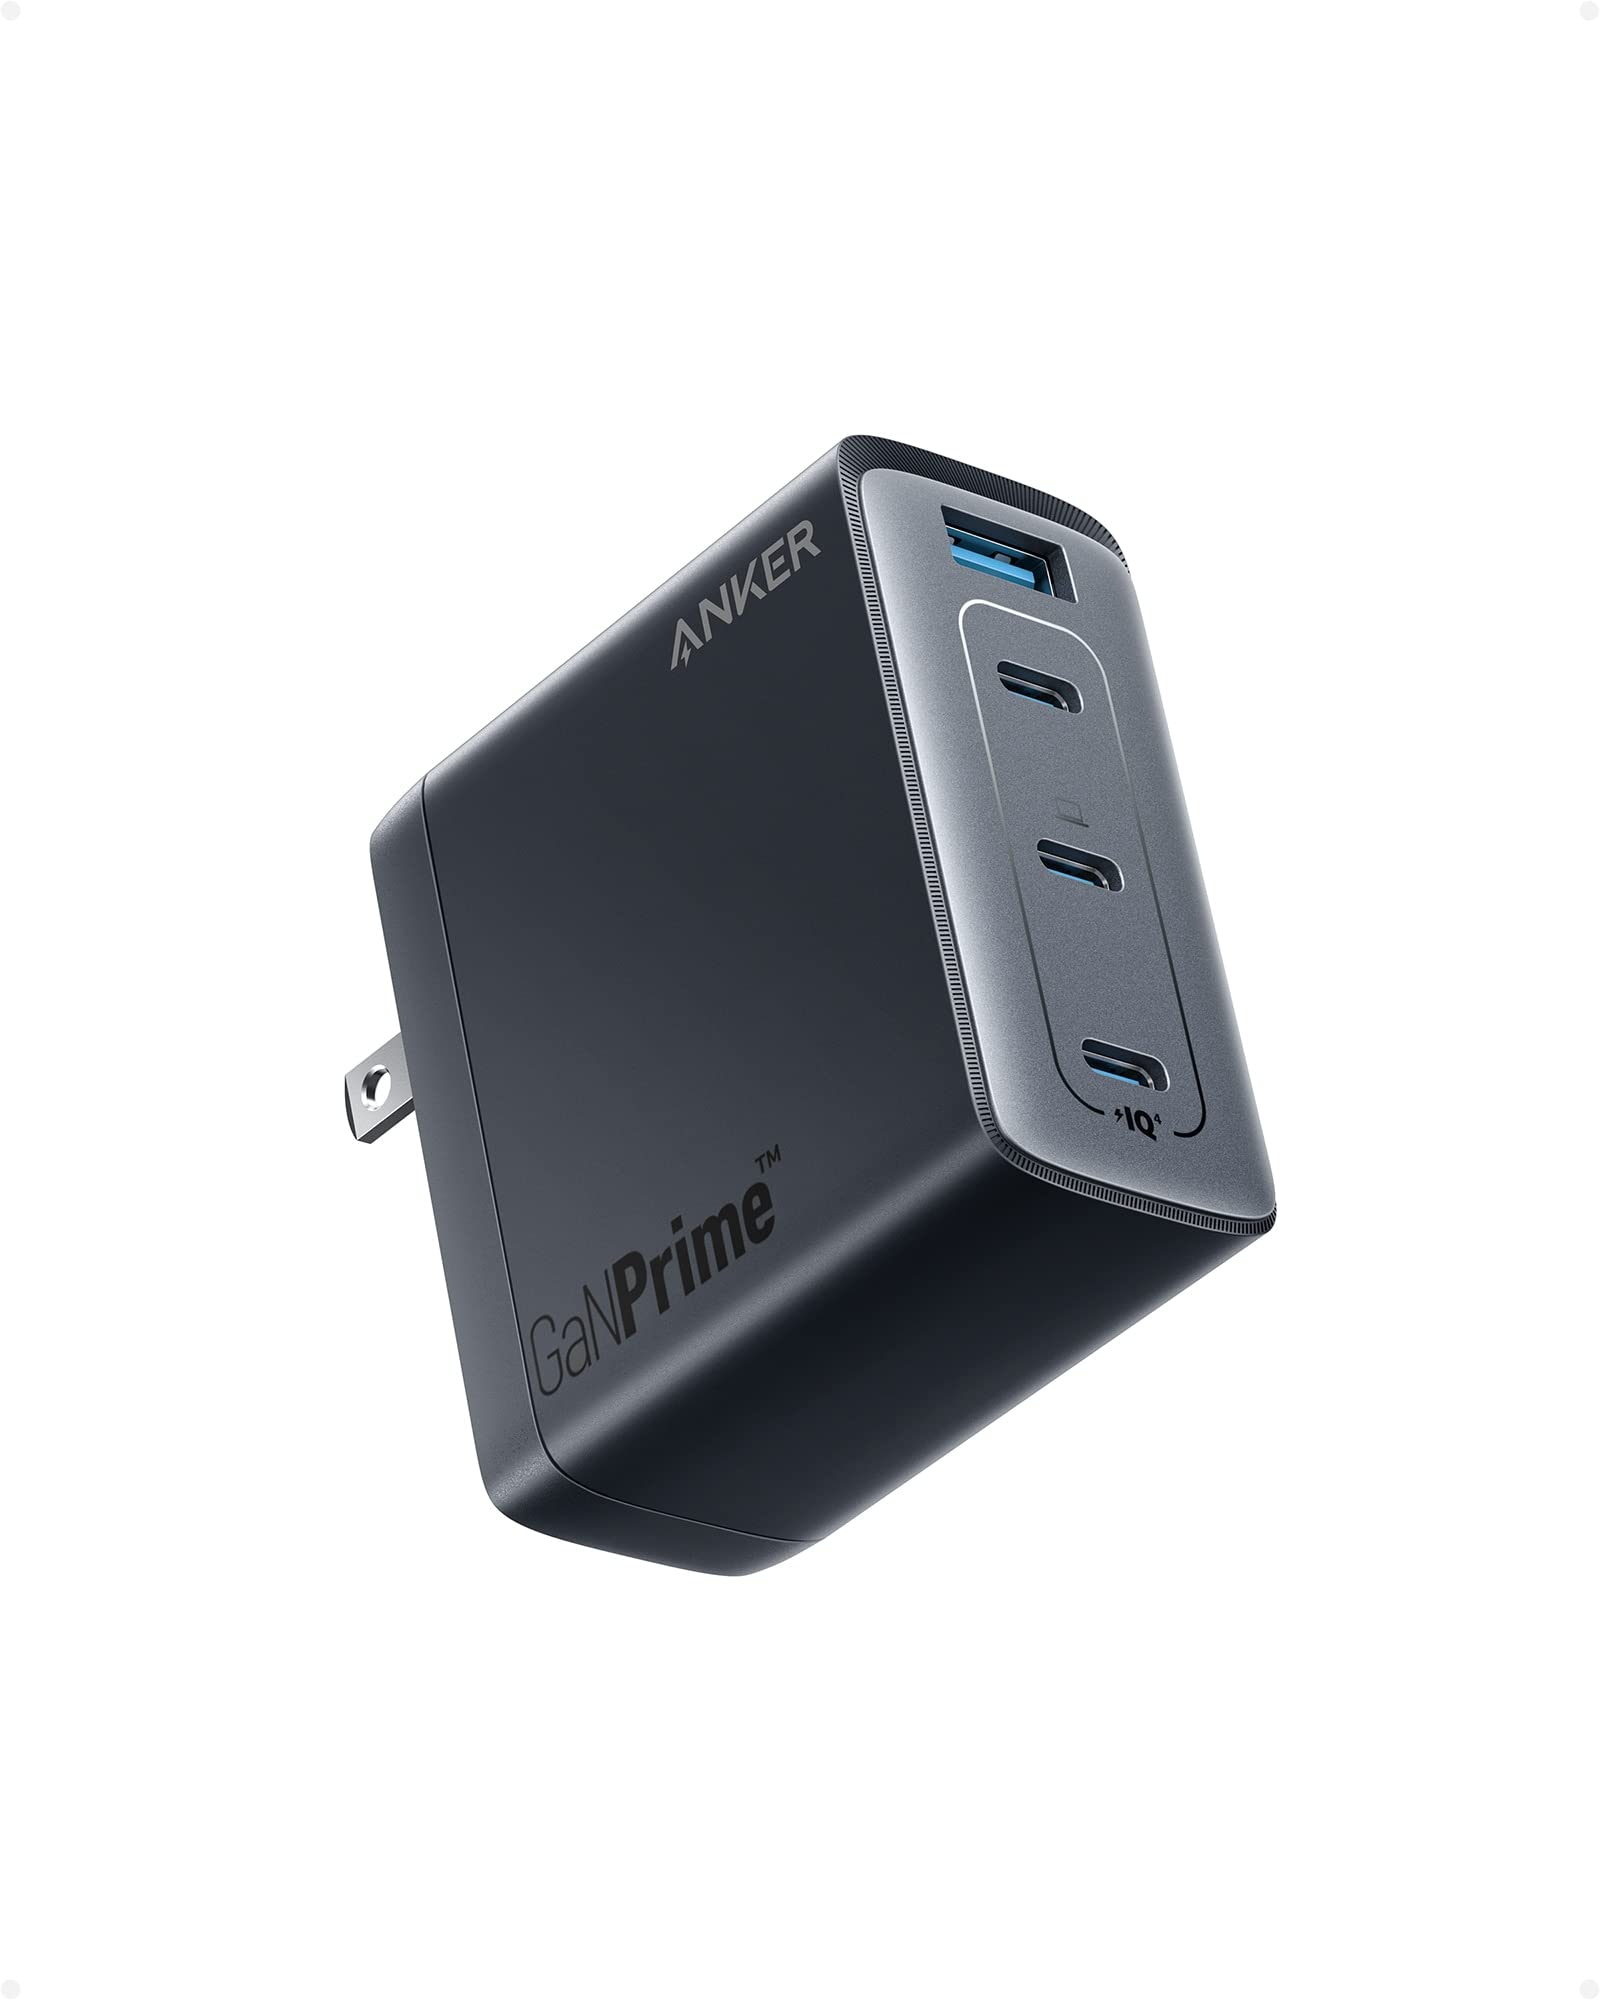 150W USB C Charger, Anker 747 Charger ( GaNPrime) $79 + Free Shipping